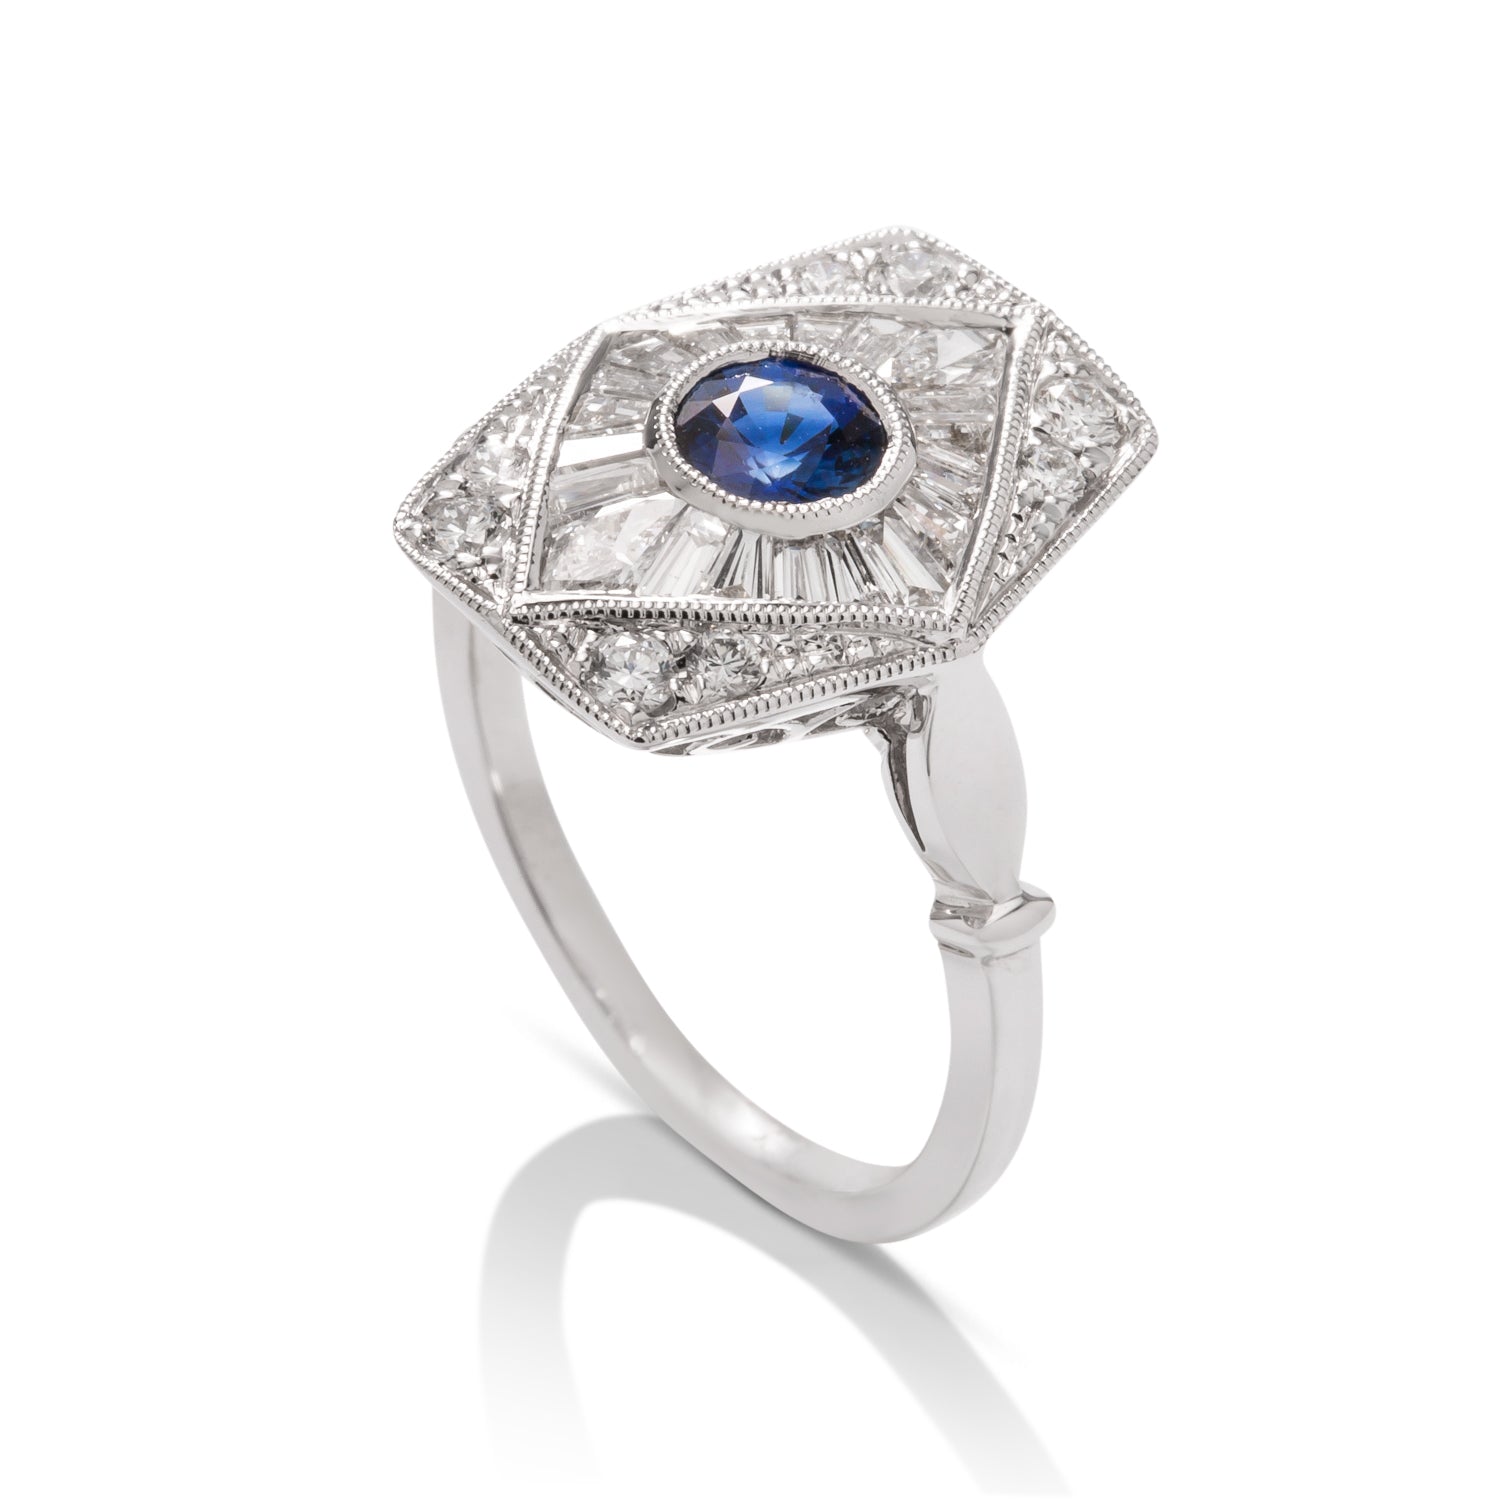 Antique Style Sapphire and Diamond Ring - Charles Koll Jewellers